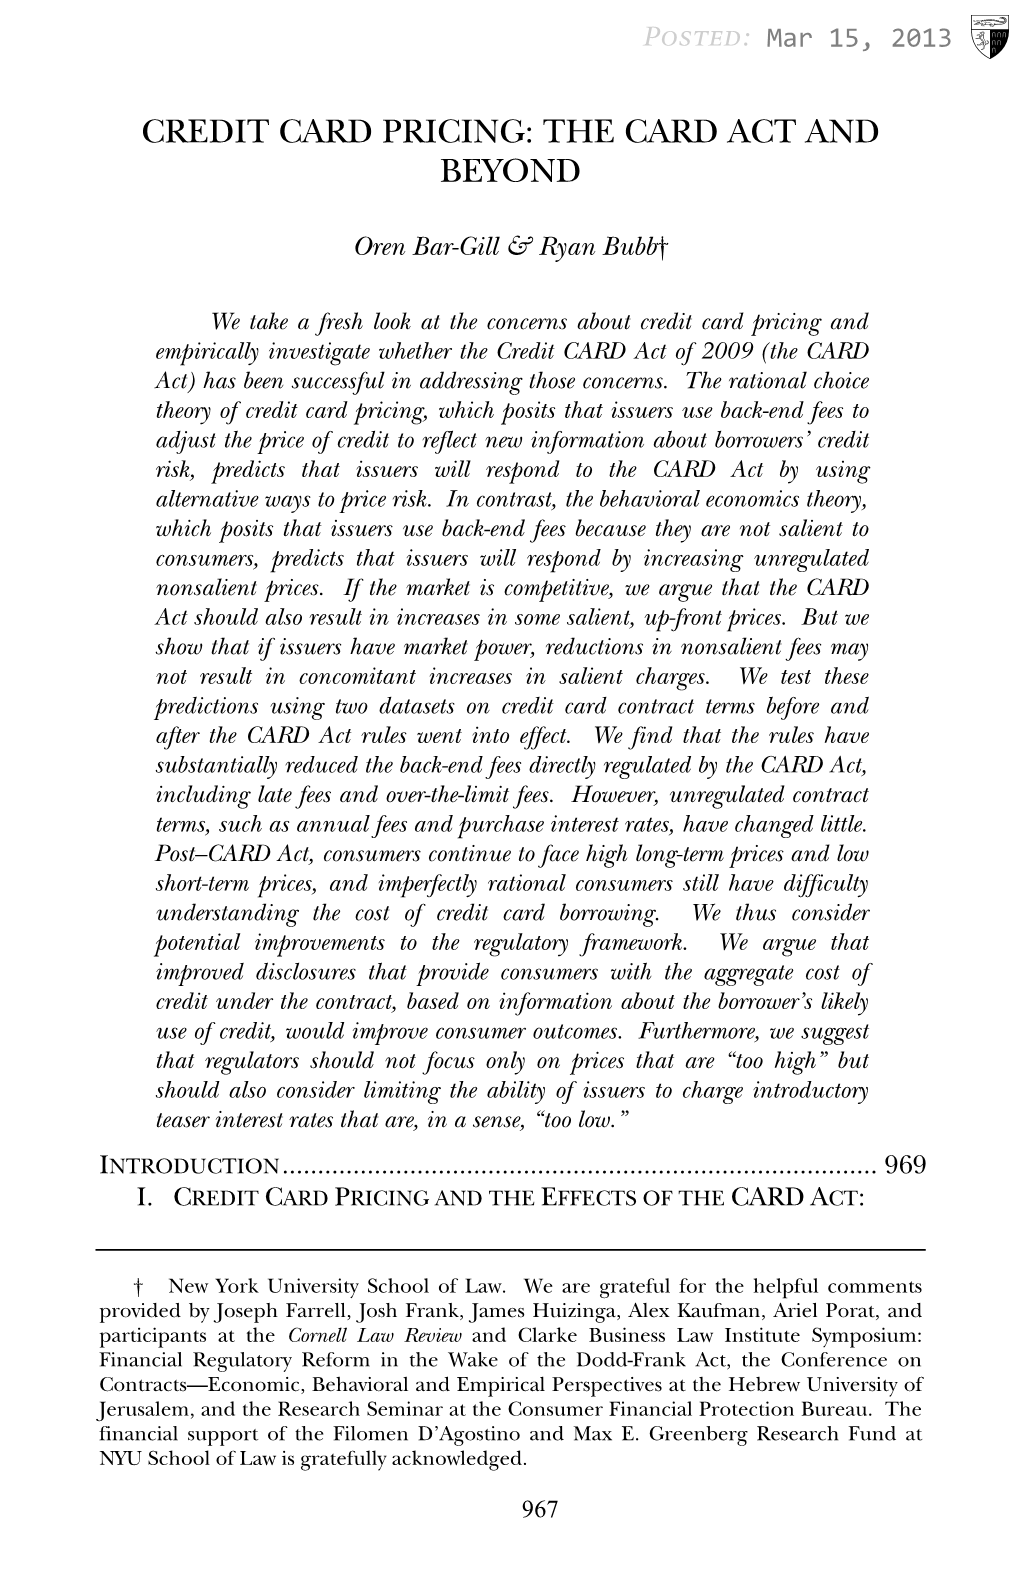 Credit Card Pricing: the Card Act and Beyond